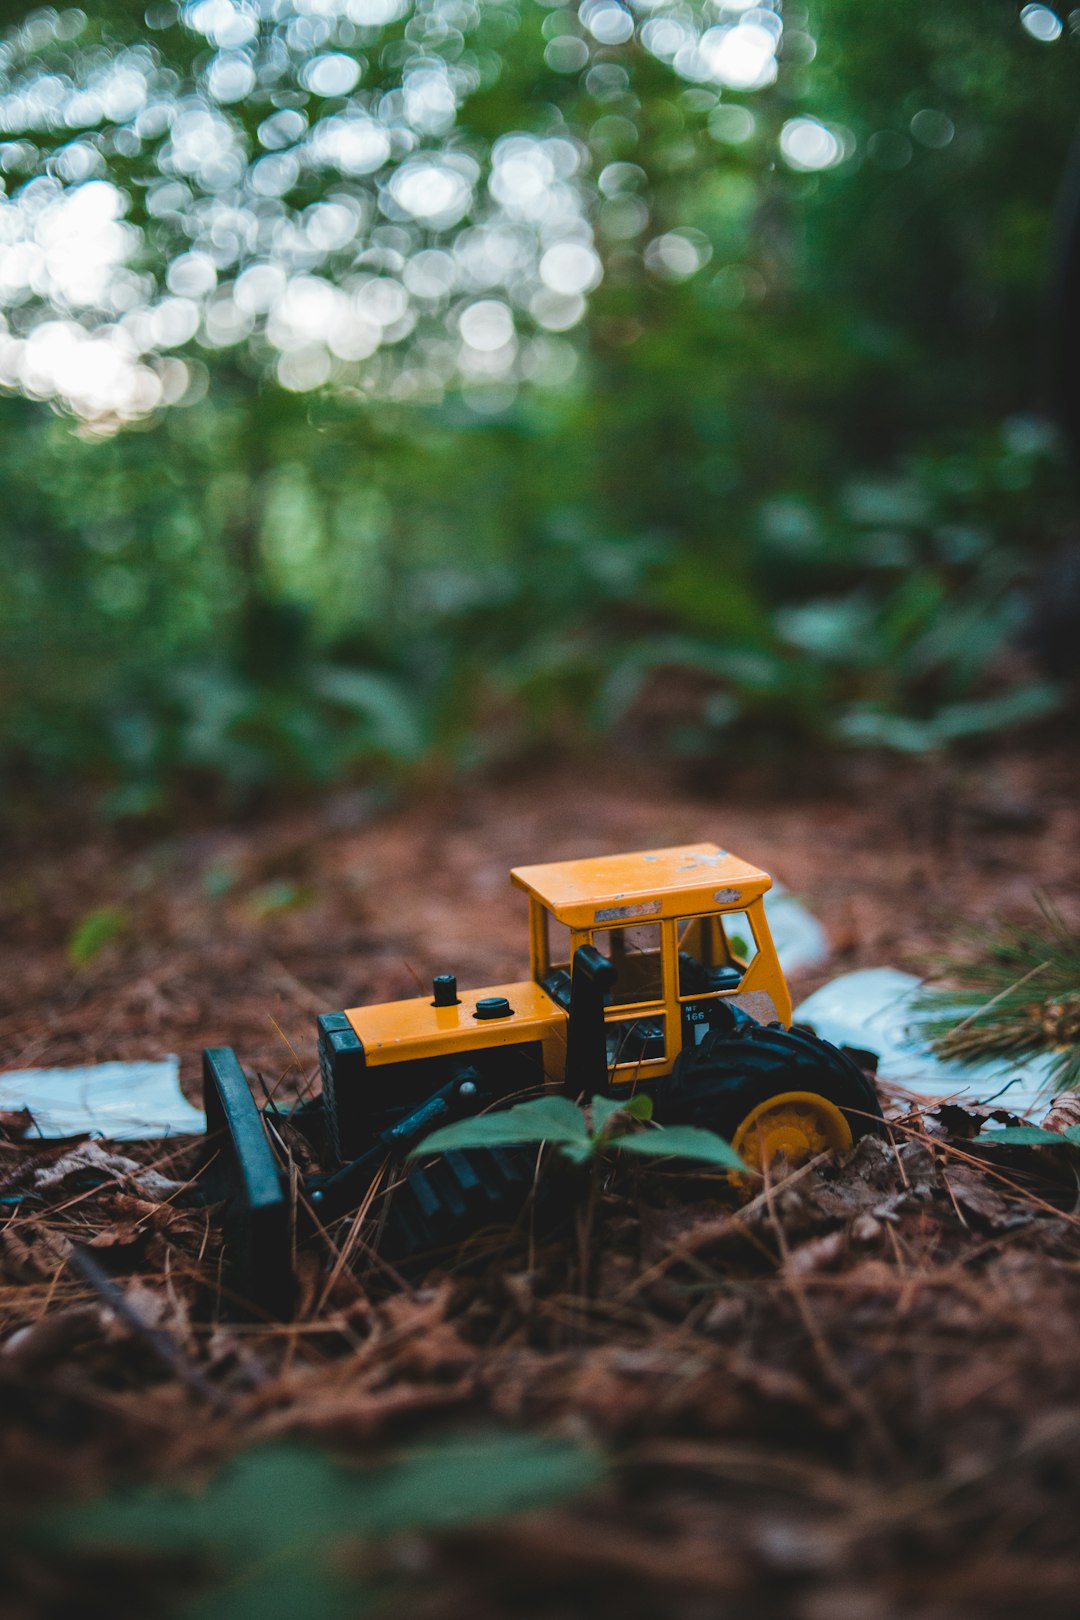 yellow and black tractor toy on ground